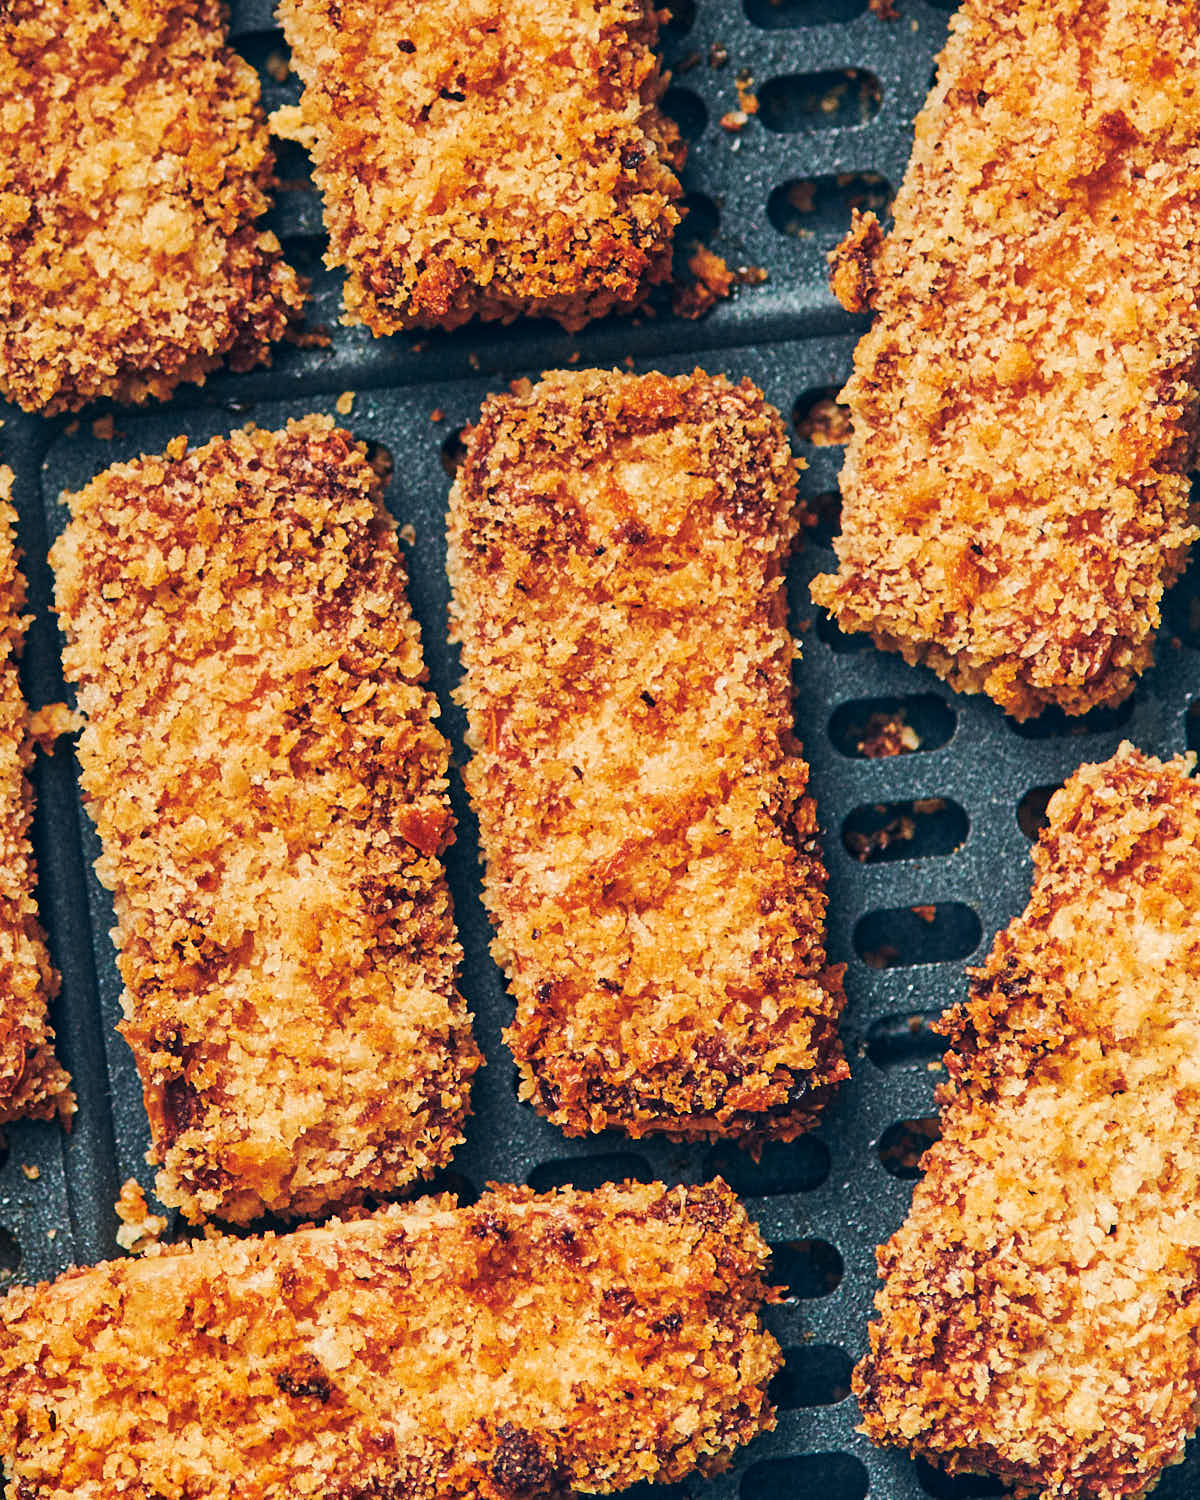 Crispy tofu sticks that are golden brown after being baked in an air fryer.